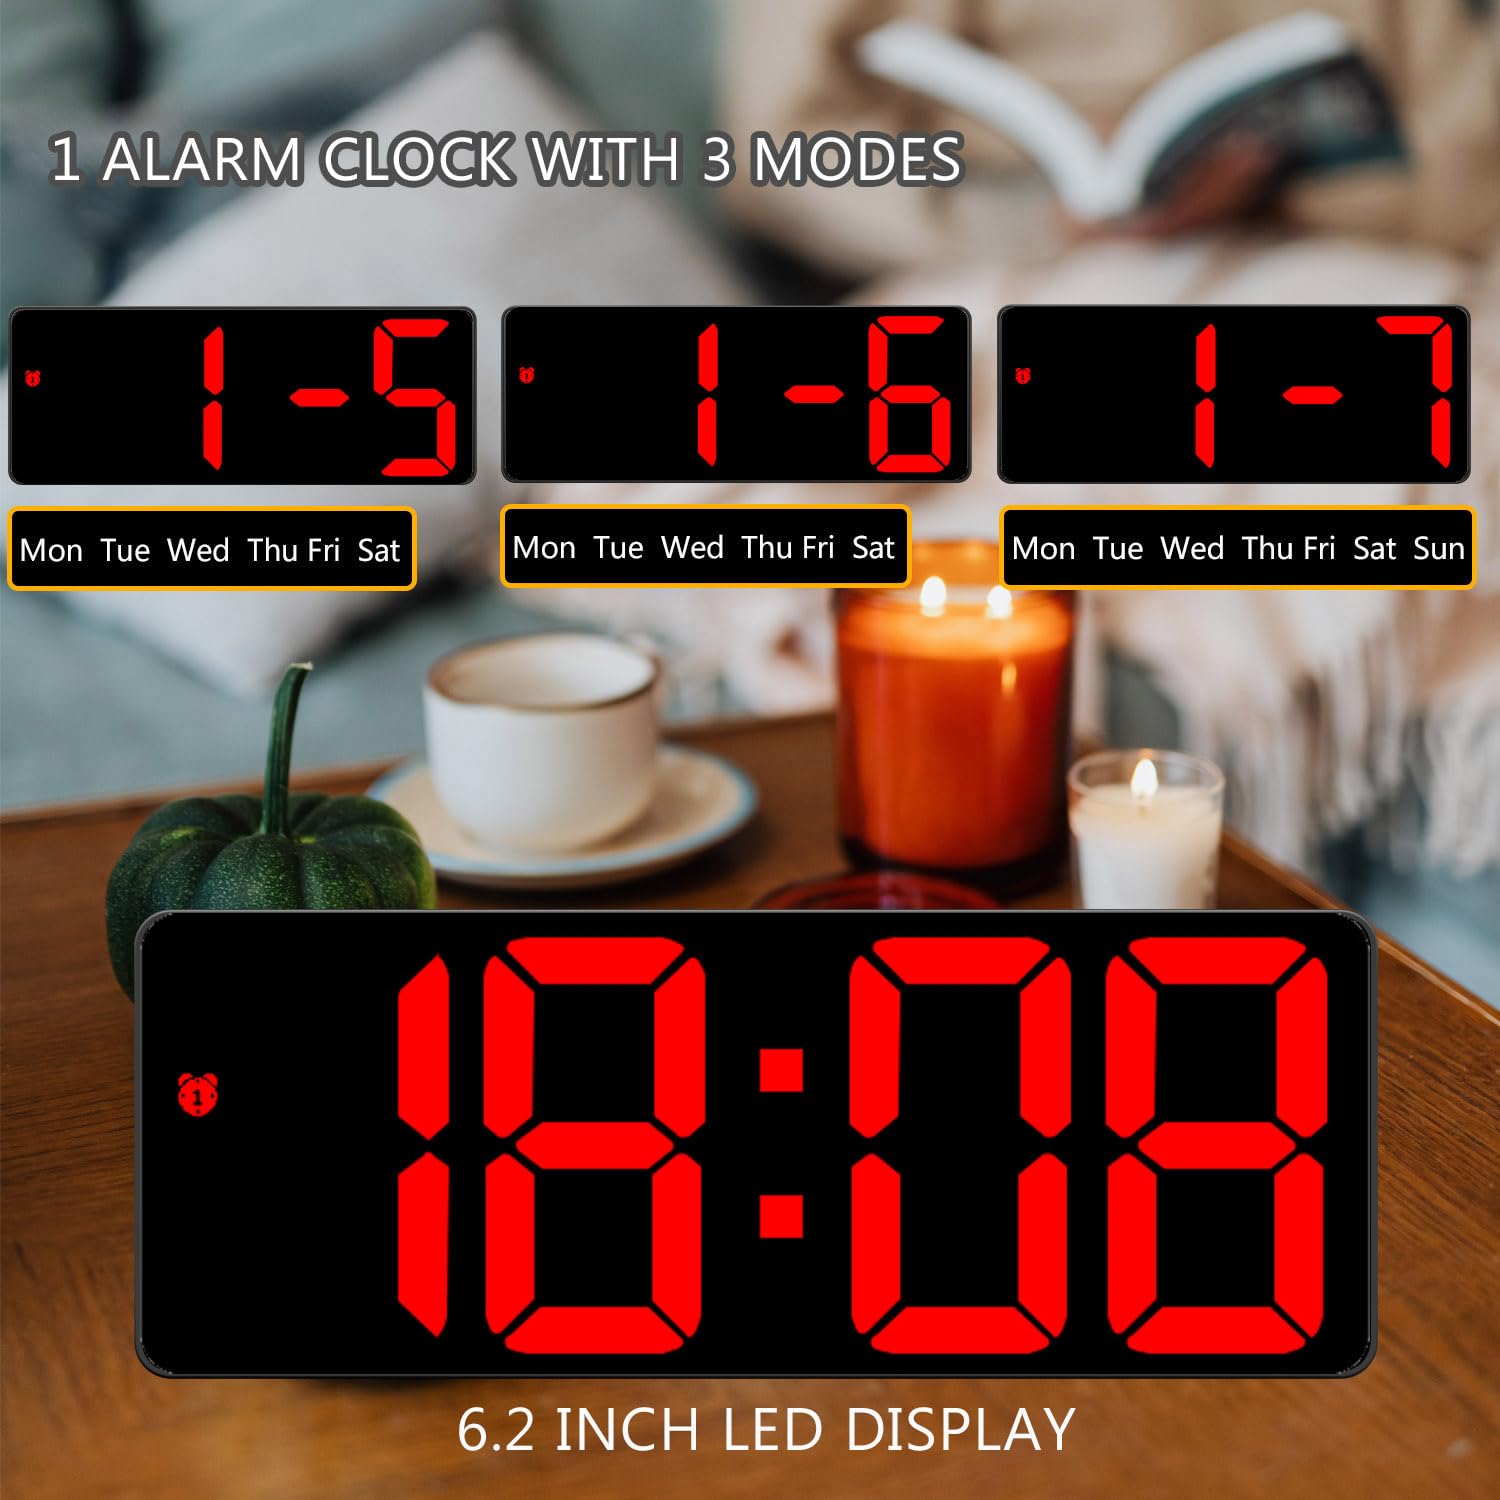 Yaboodn Digital Alarm Clock for Bedrooms, 6.5 inch LED Display with Red Digits, 3 Levels Brightness Adjustable, Desk Alarm, Table Clock with 1 Alarm, 12/24H, Temperature, Calendar Corded Powered(Red)